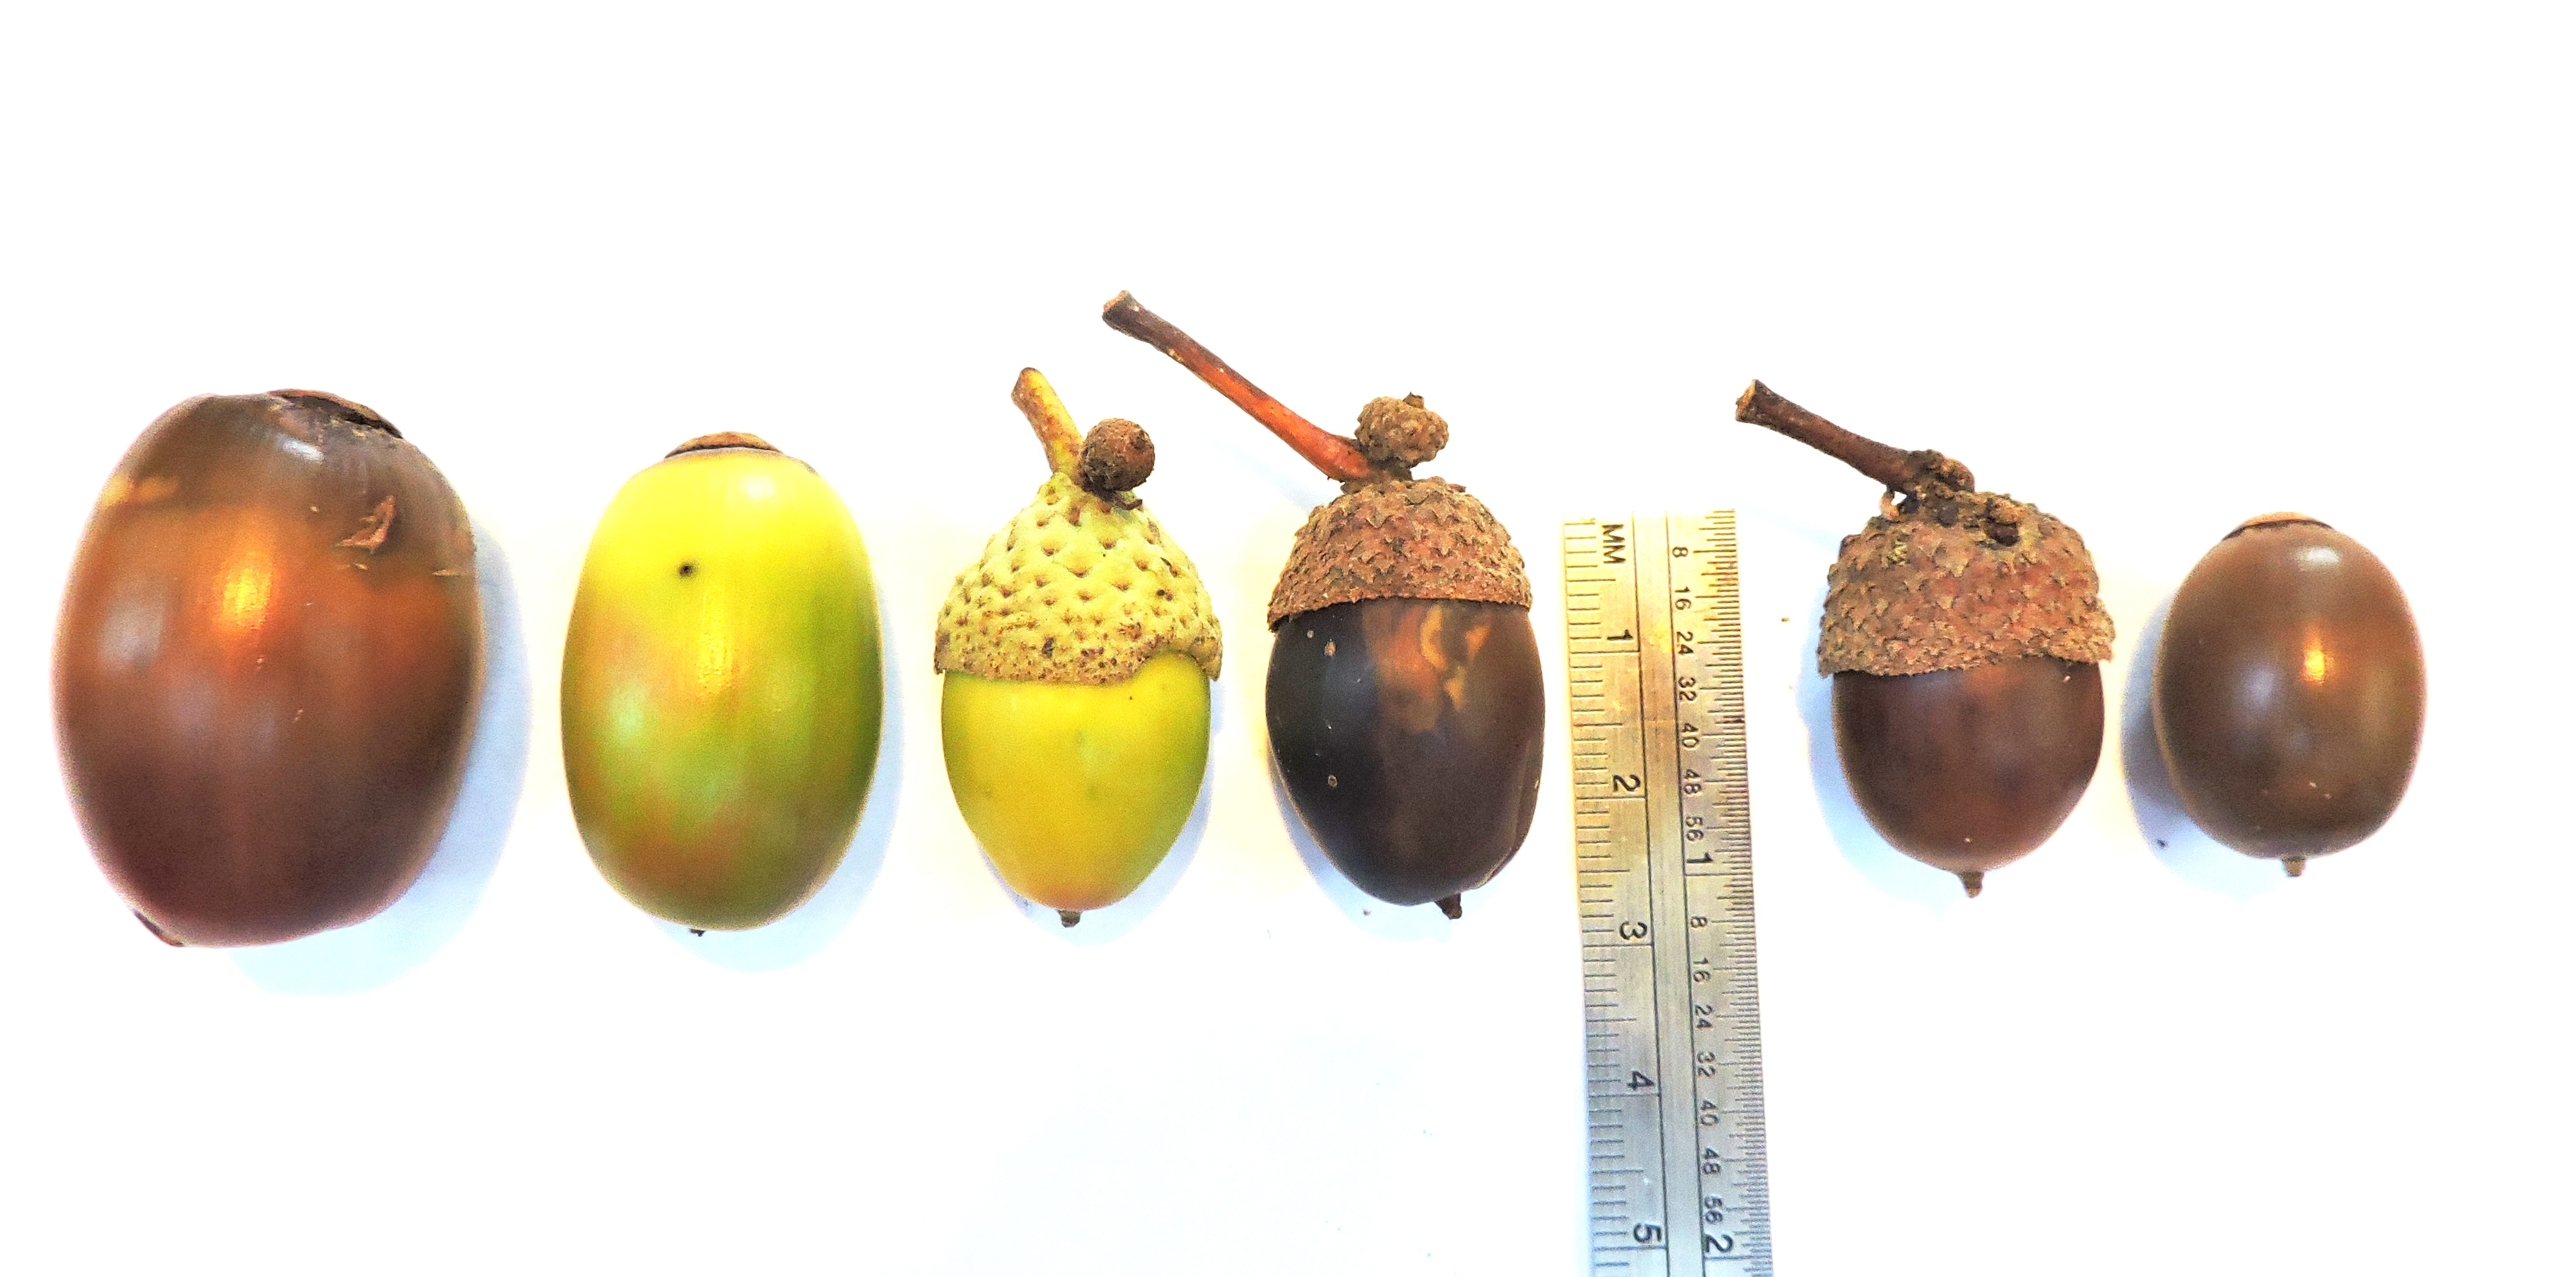 About Acorns - Wildfoods 4 Wildlife